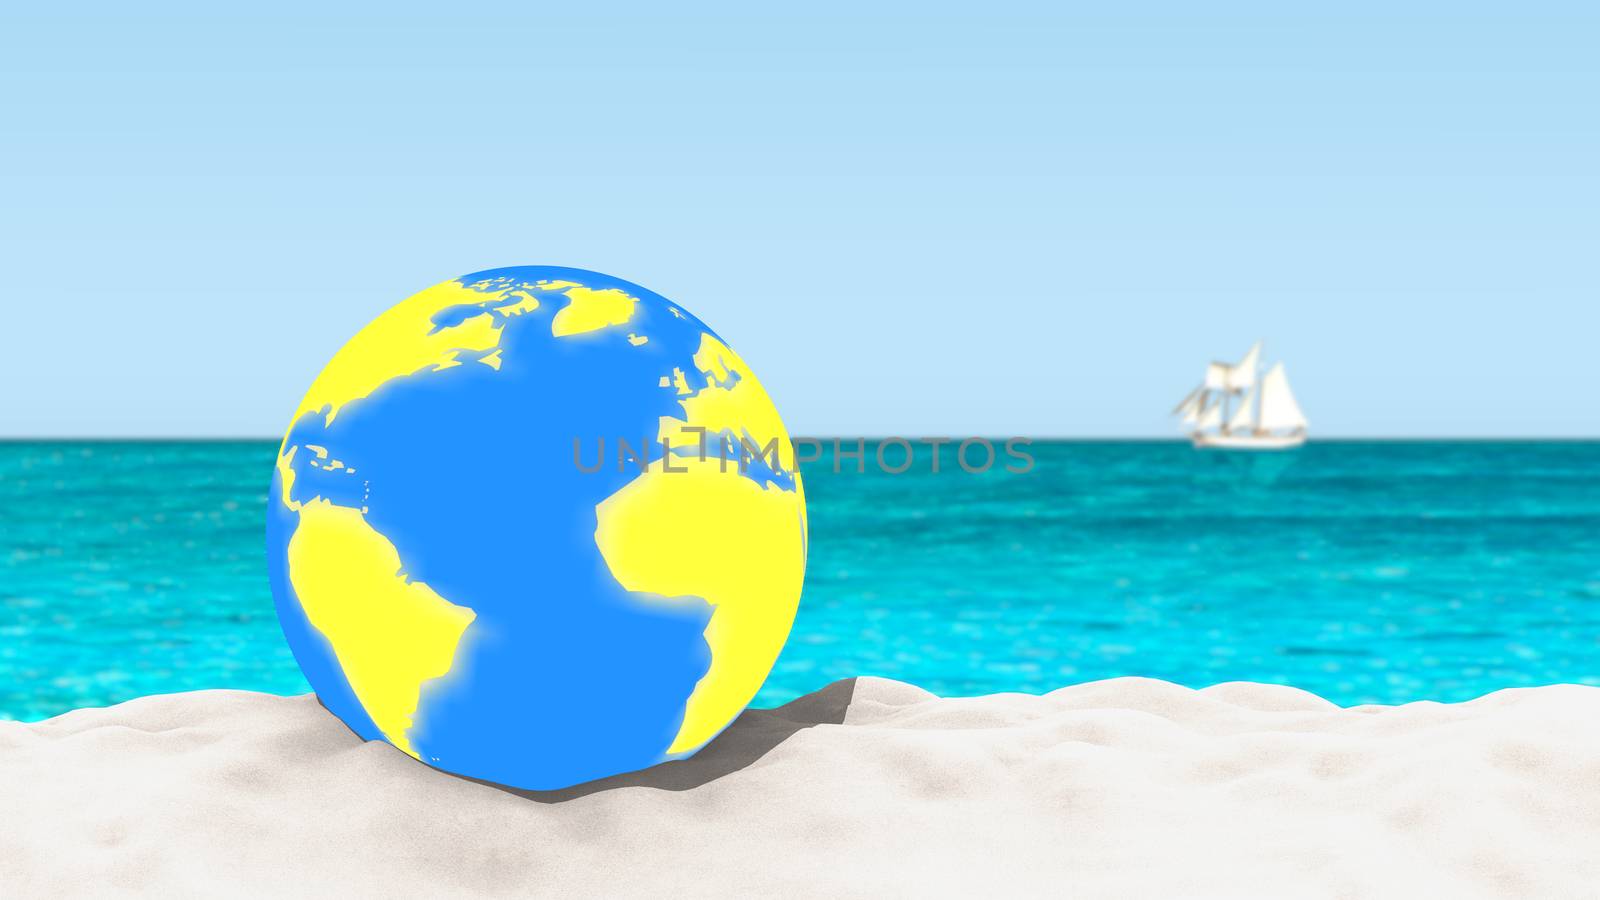 Ball with a world map pattern. Sandy beach with a blurred boat on ocean.